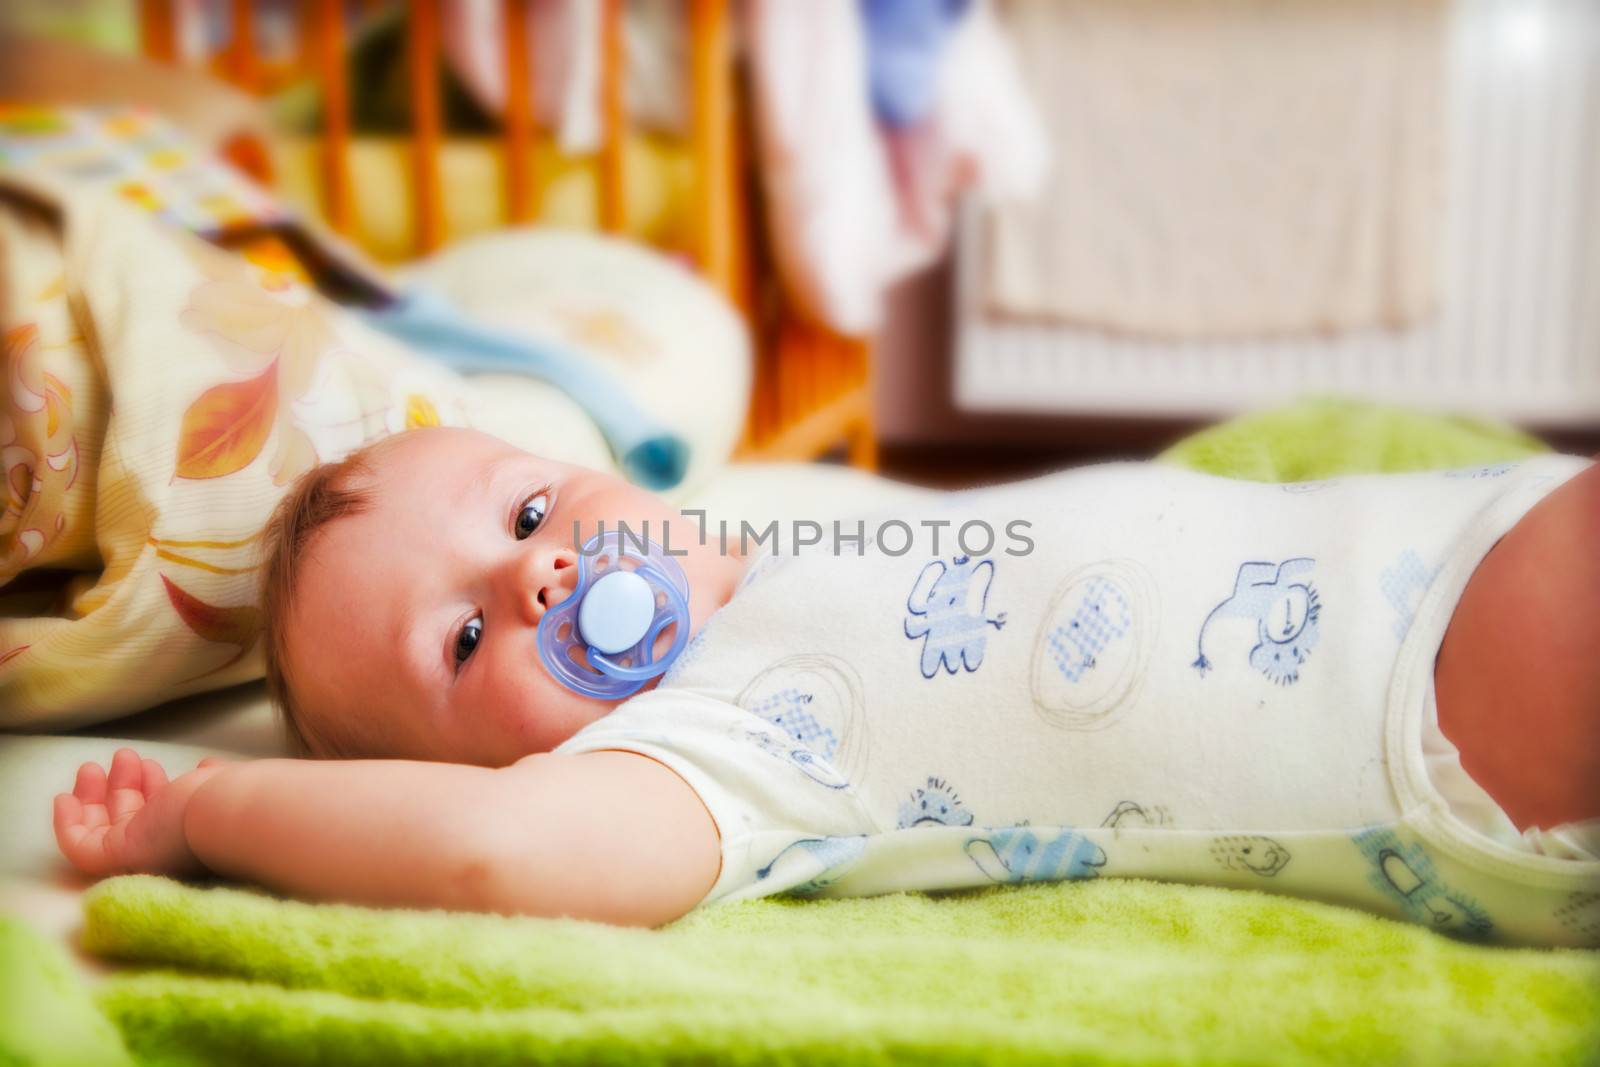 A baby waiting for changing his napkin by photocreo